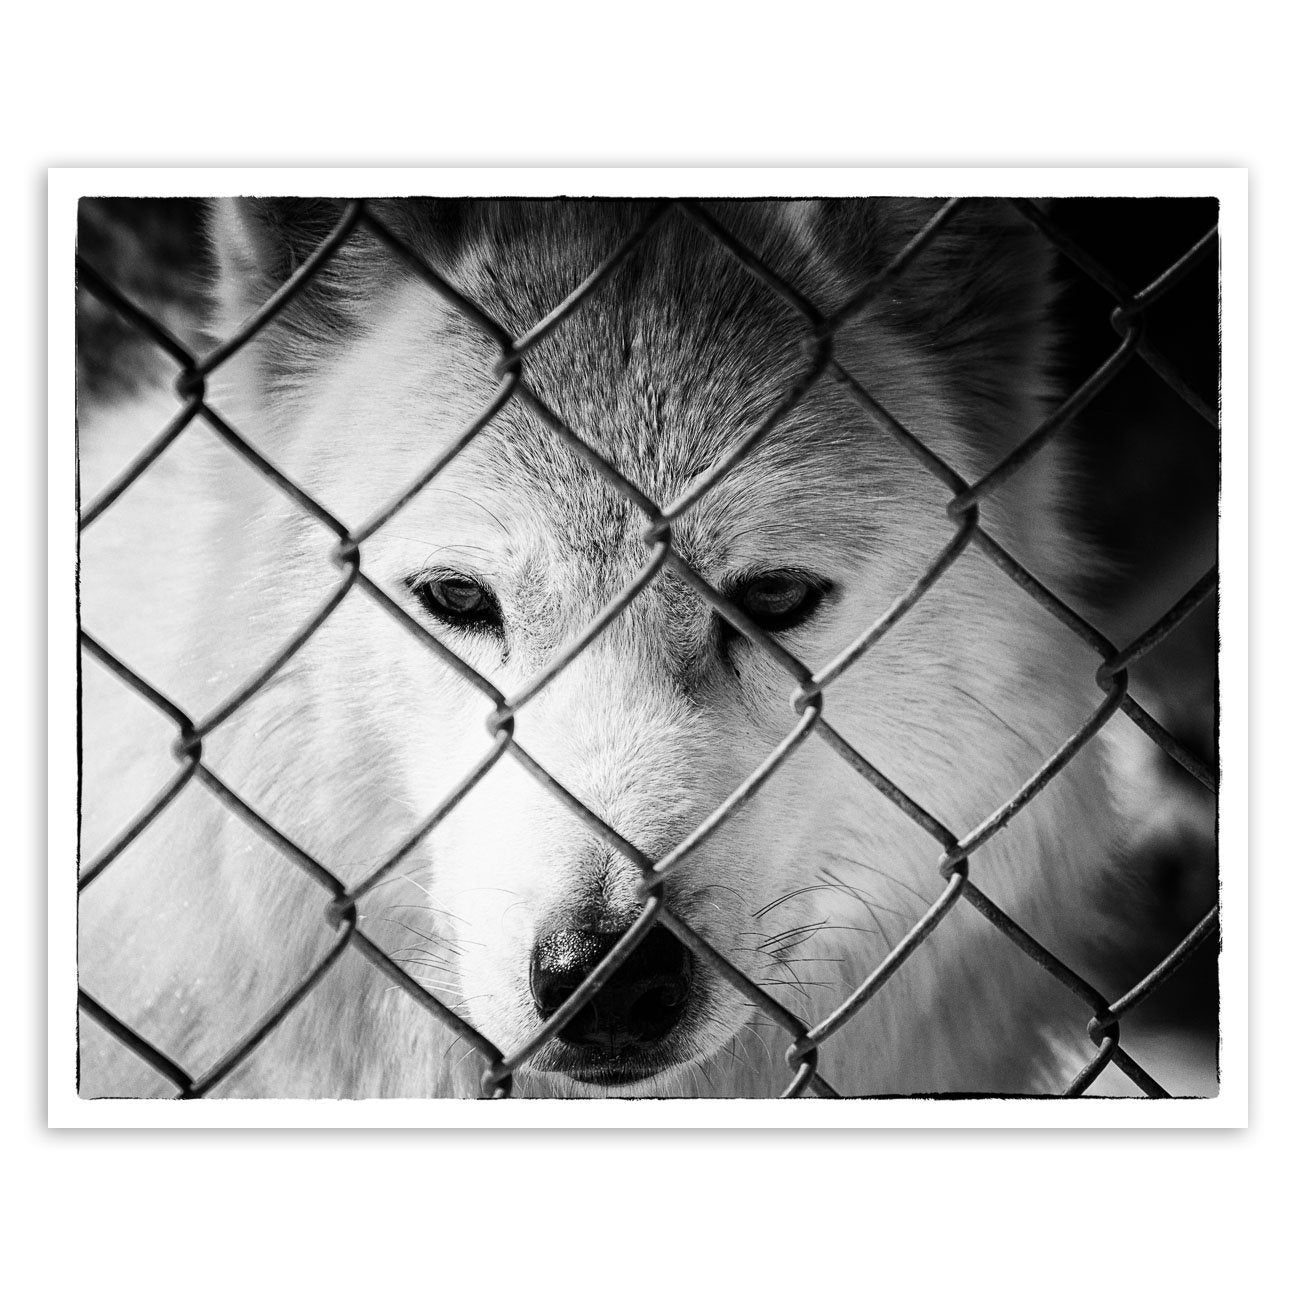 Dreams of Freedom in Black and White Animal / Wildlife Photograph Fine Art Canvas & Unframed Wall Art Prints  - PIPAFINEART